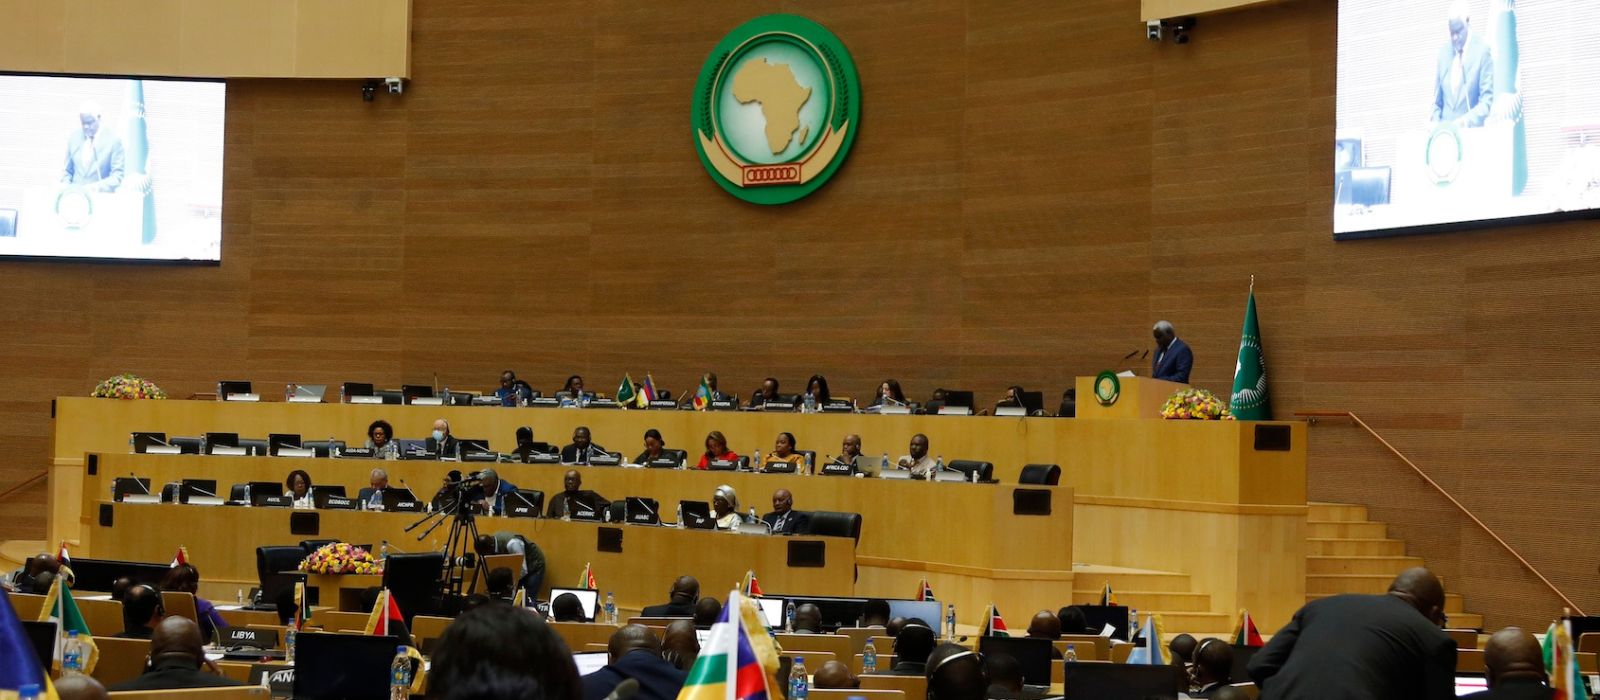 Progress, challenges, and prospects of Africa’s development form the agenda of ministers at the AU Summit.